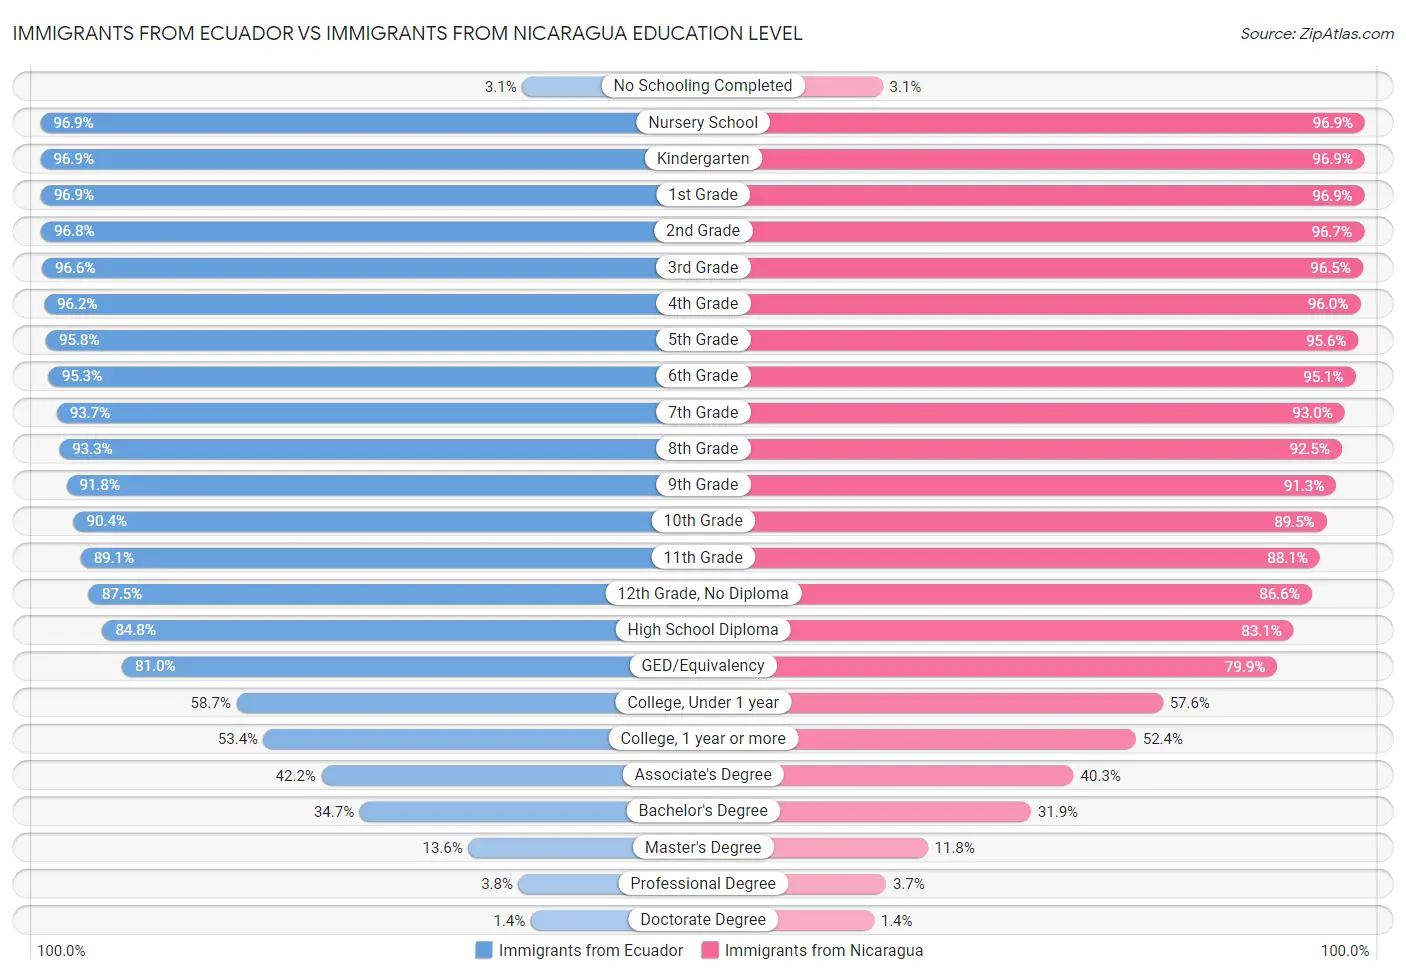 Immigrants from Ecuador vs Immigrants from Nicaragua Education Level